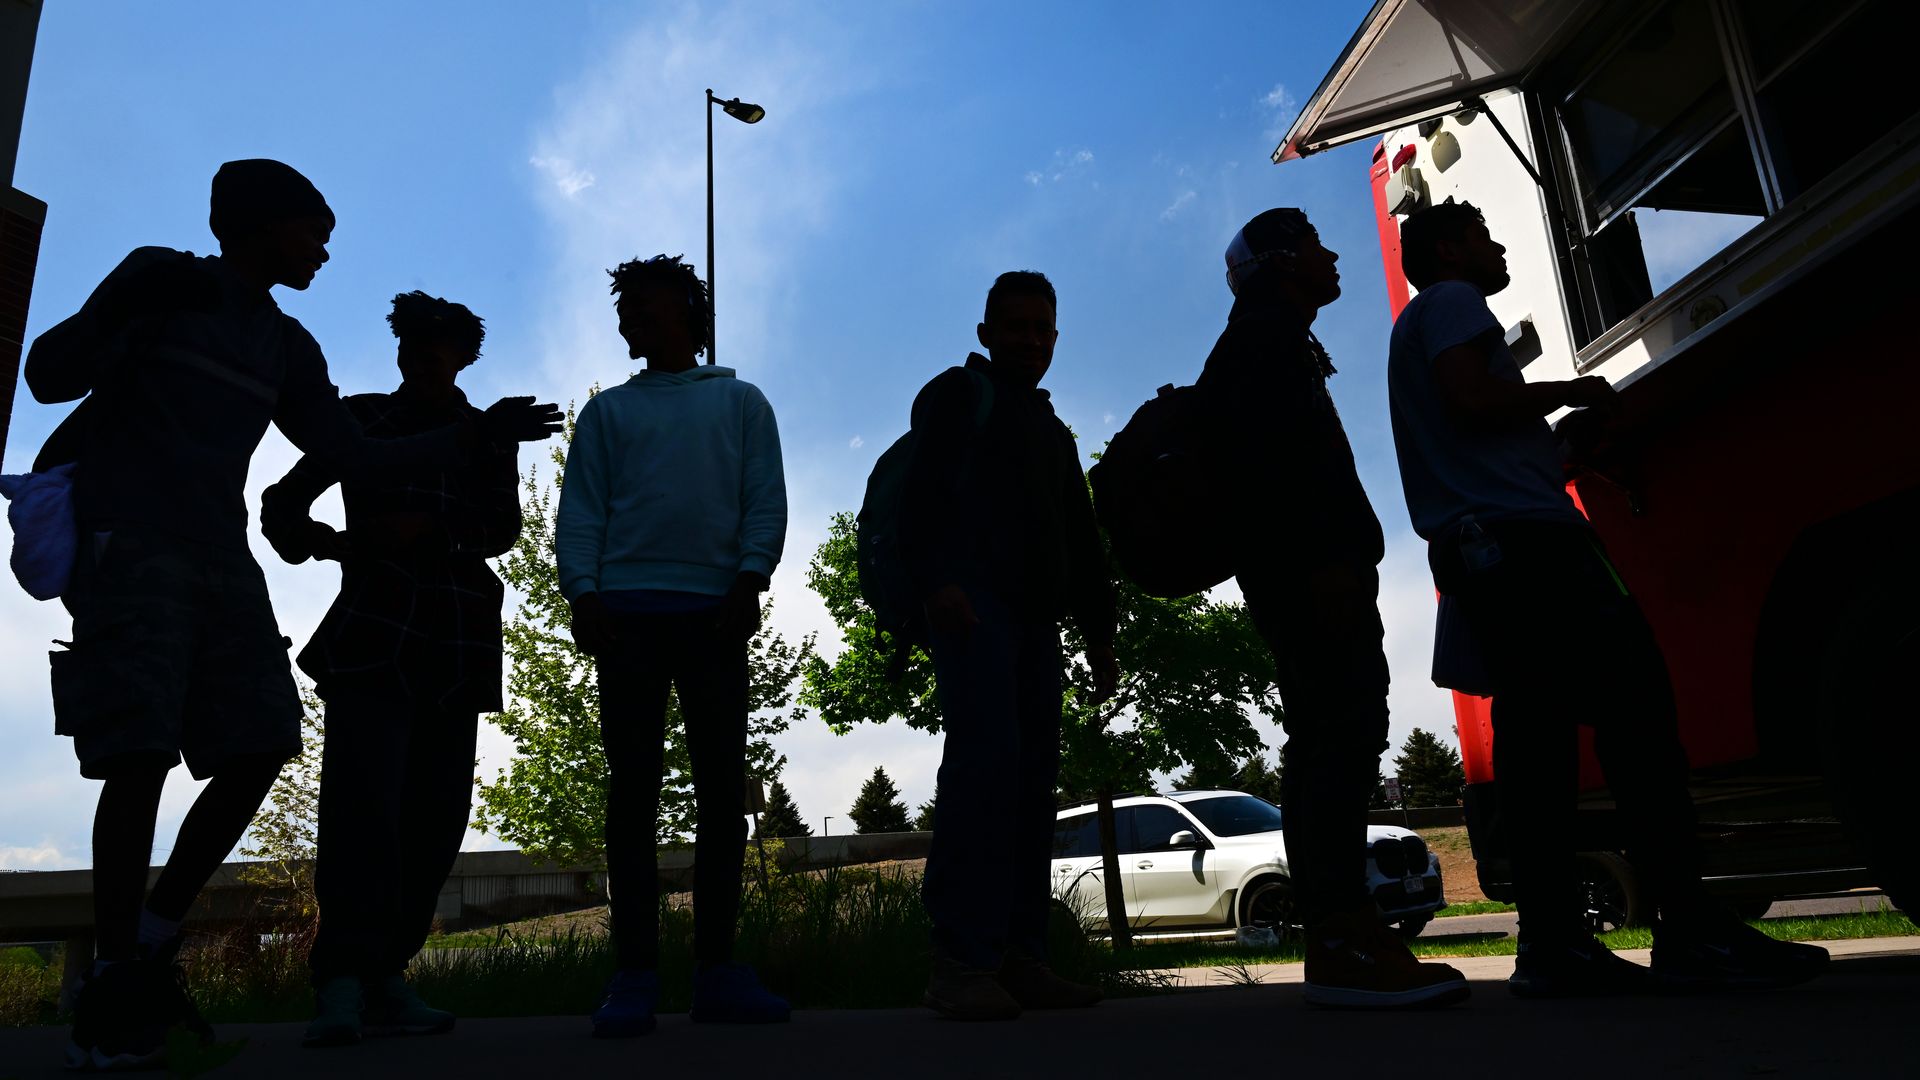 The silhouette of several men waiting in line at a food truck during a sunny day in Denver.  